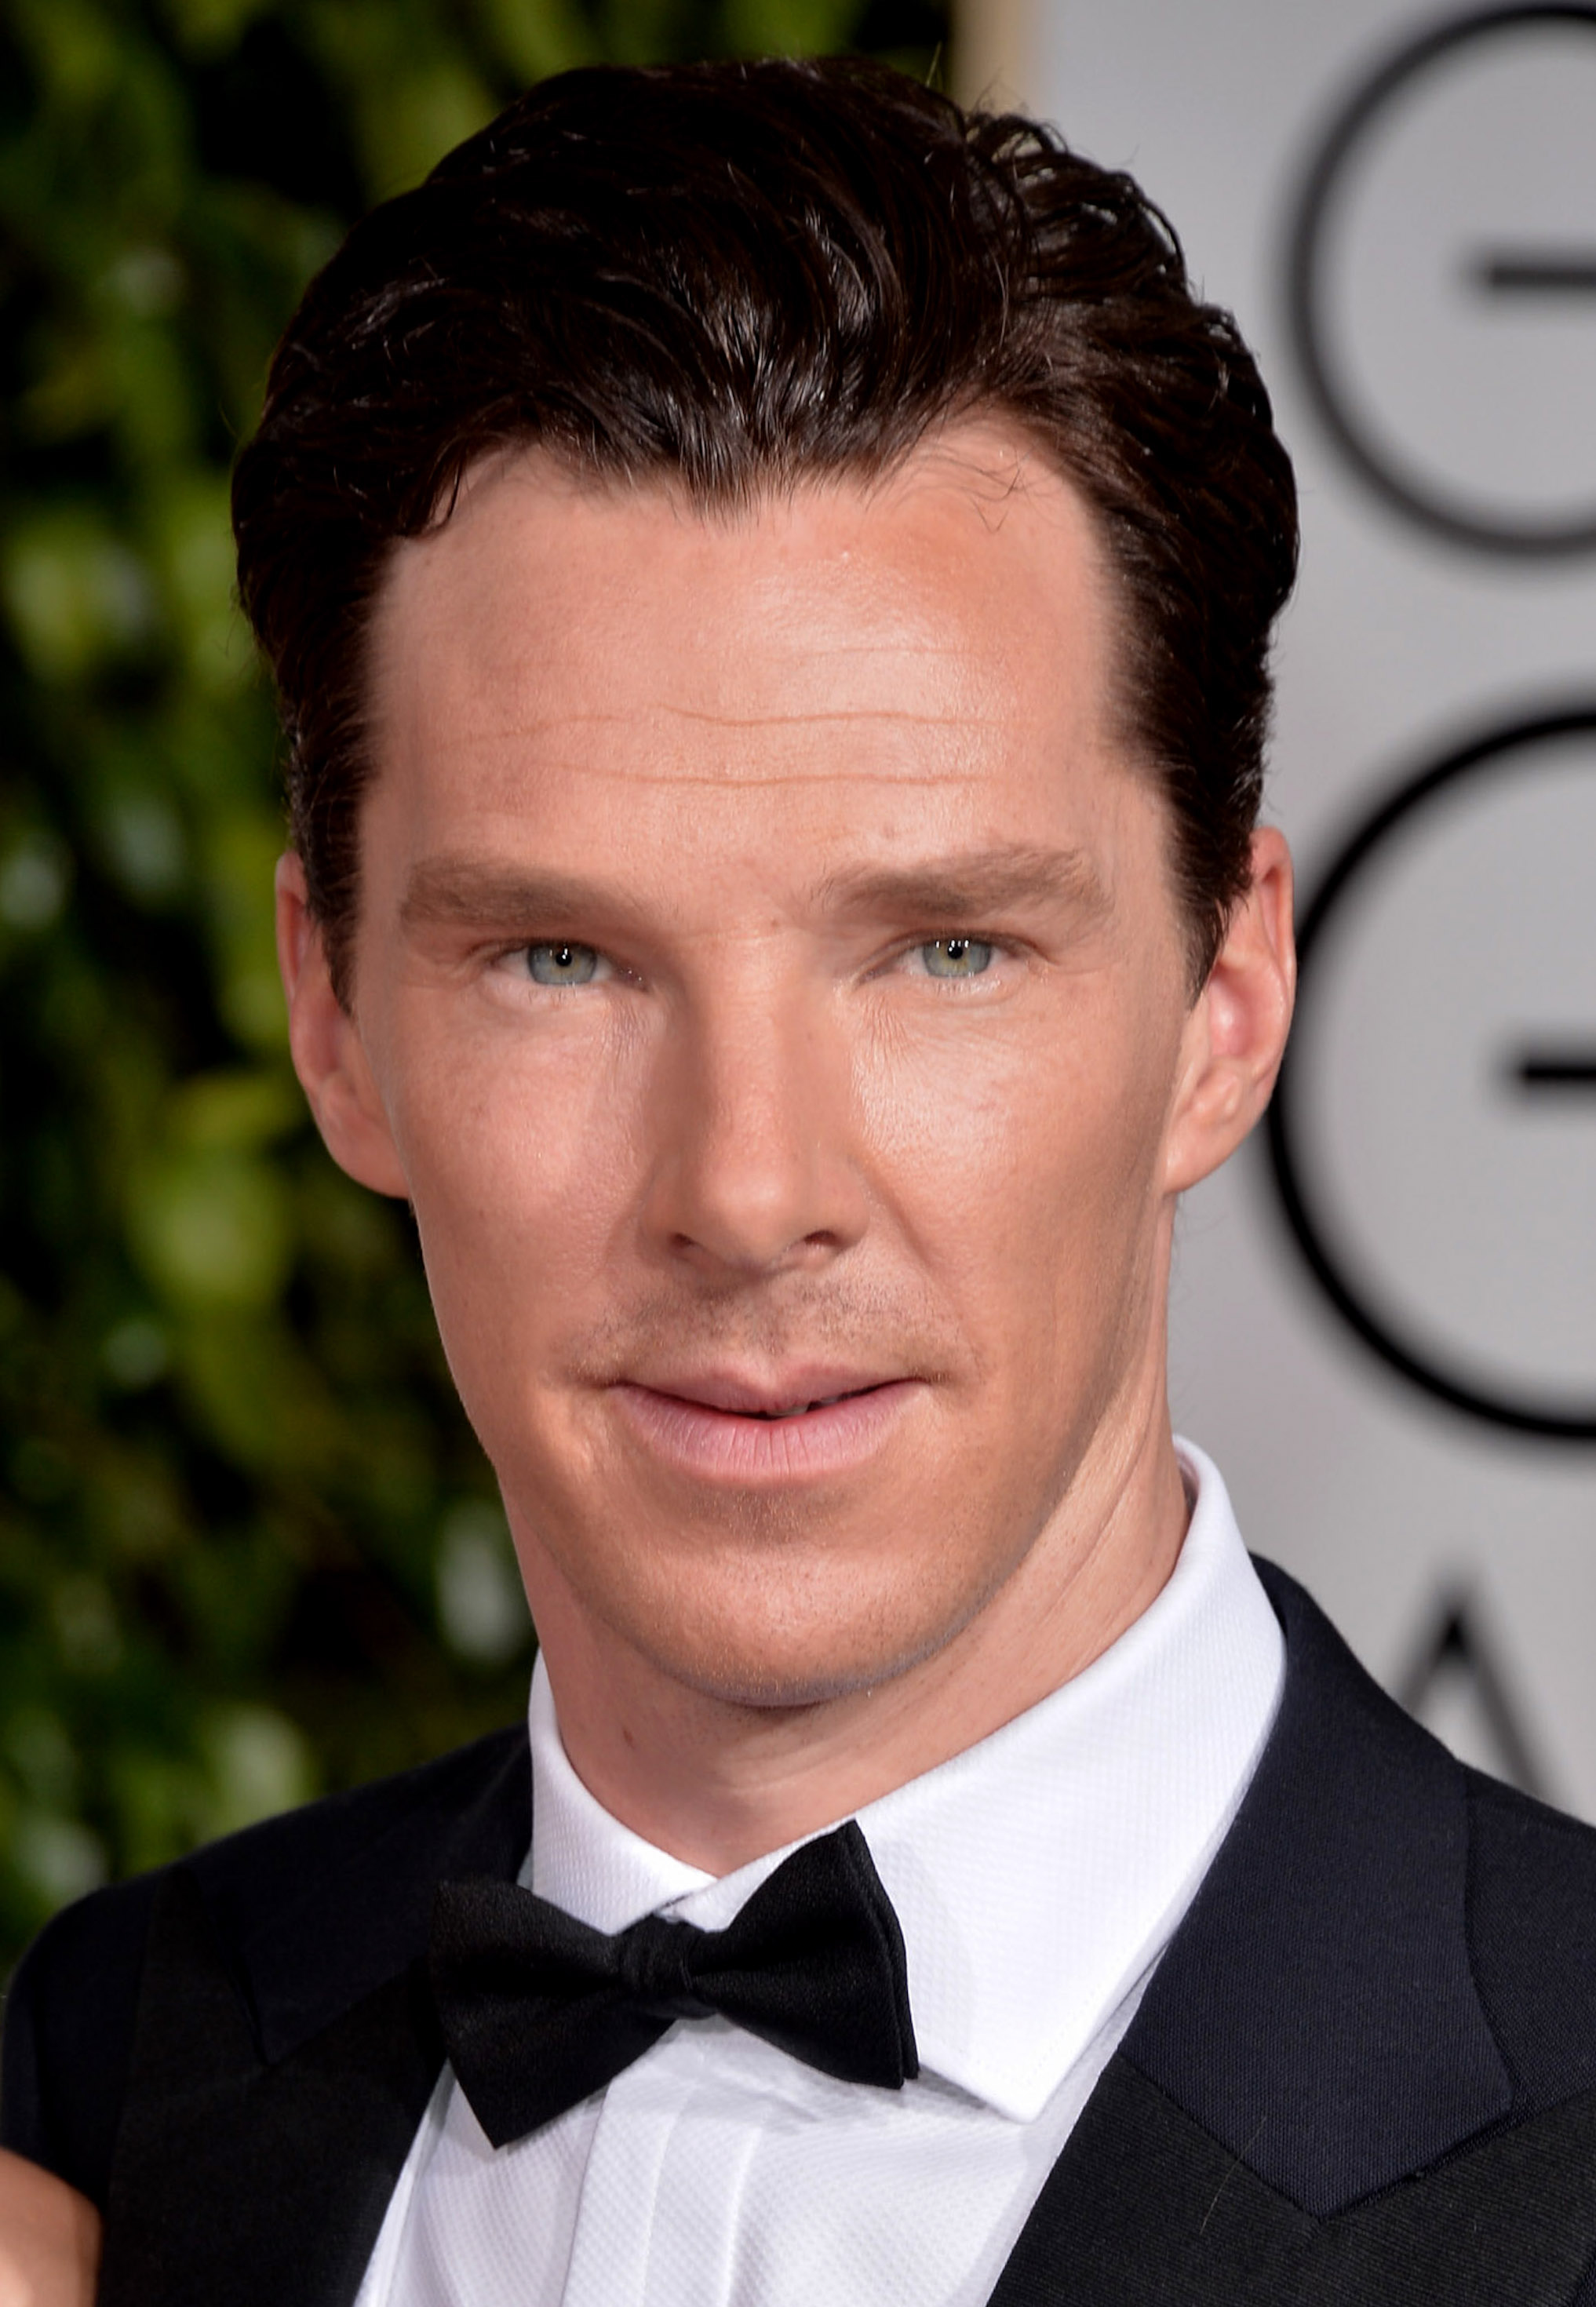 Actor Benedict Cumberbatch attends the 72nd Annual Golden Globe Awards at The Beverly Hilton Hotel on Jan. 11, 2015 in Beverly Hills, Calif. (George Pimentel—WireImage/Getty Images)